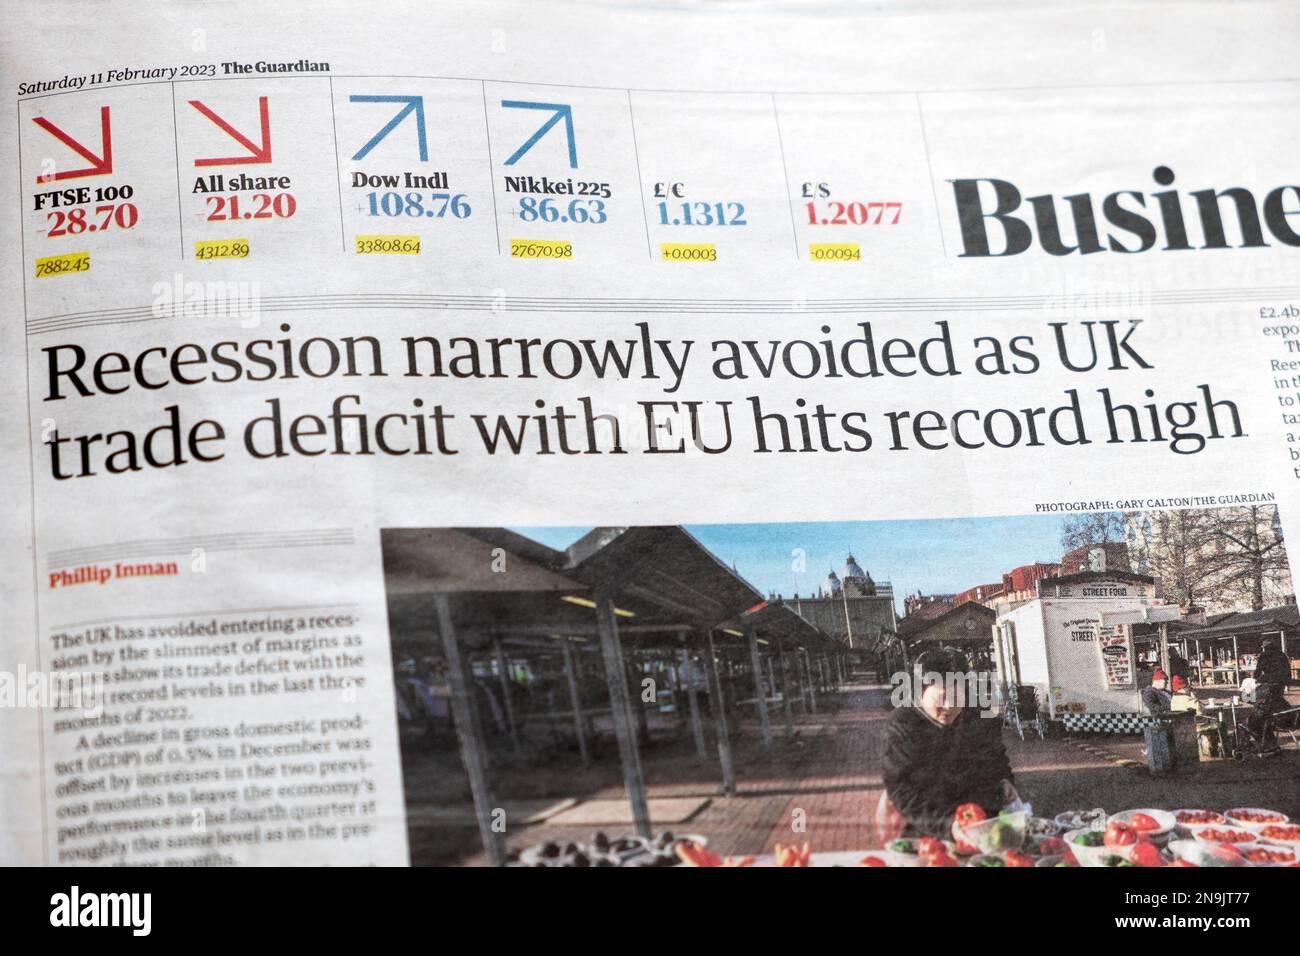 'Recession narrowly avoided as UK trade deficit with EU hits record high' Guardian newspaper headline British economy article 11 February 2023 UK Stock Photo